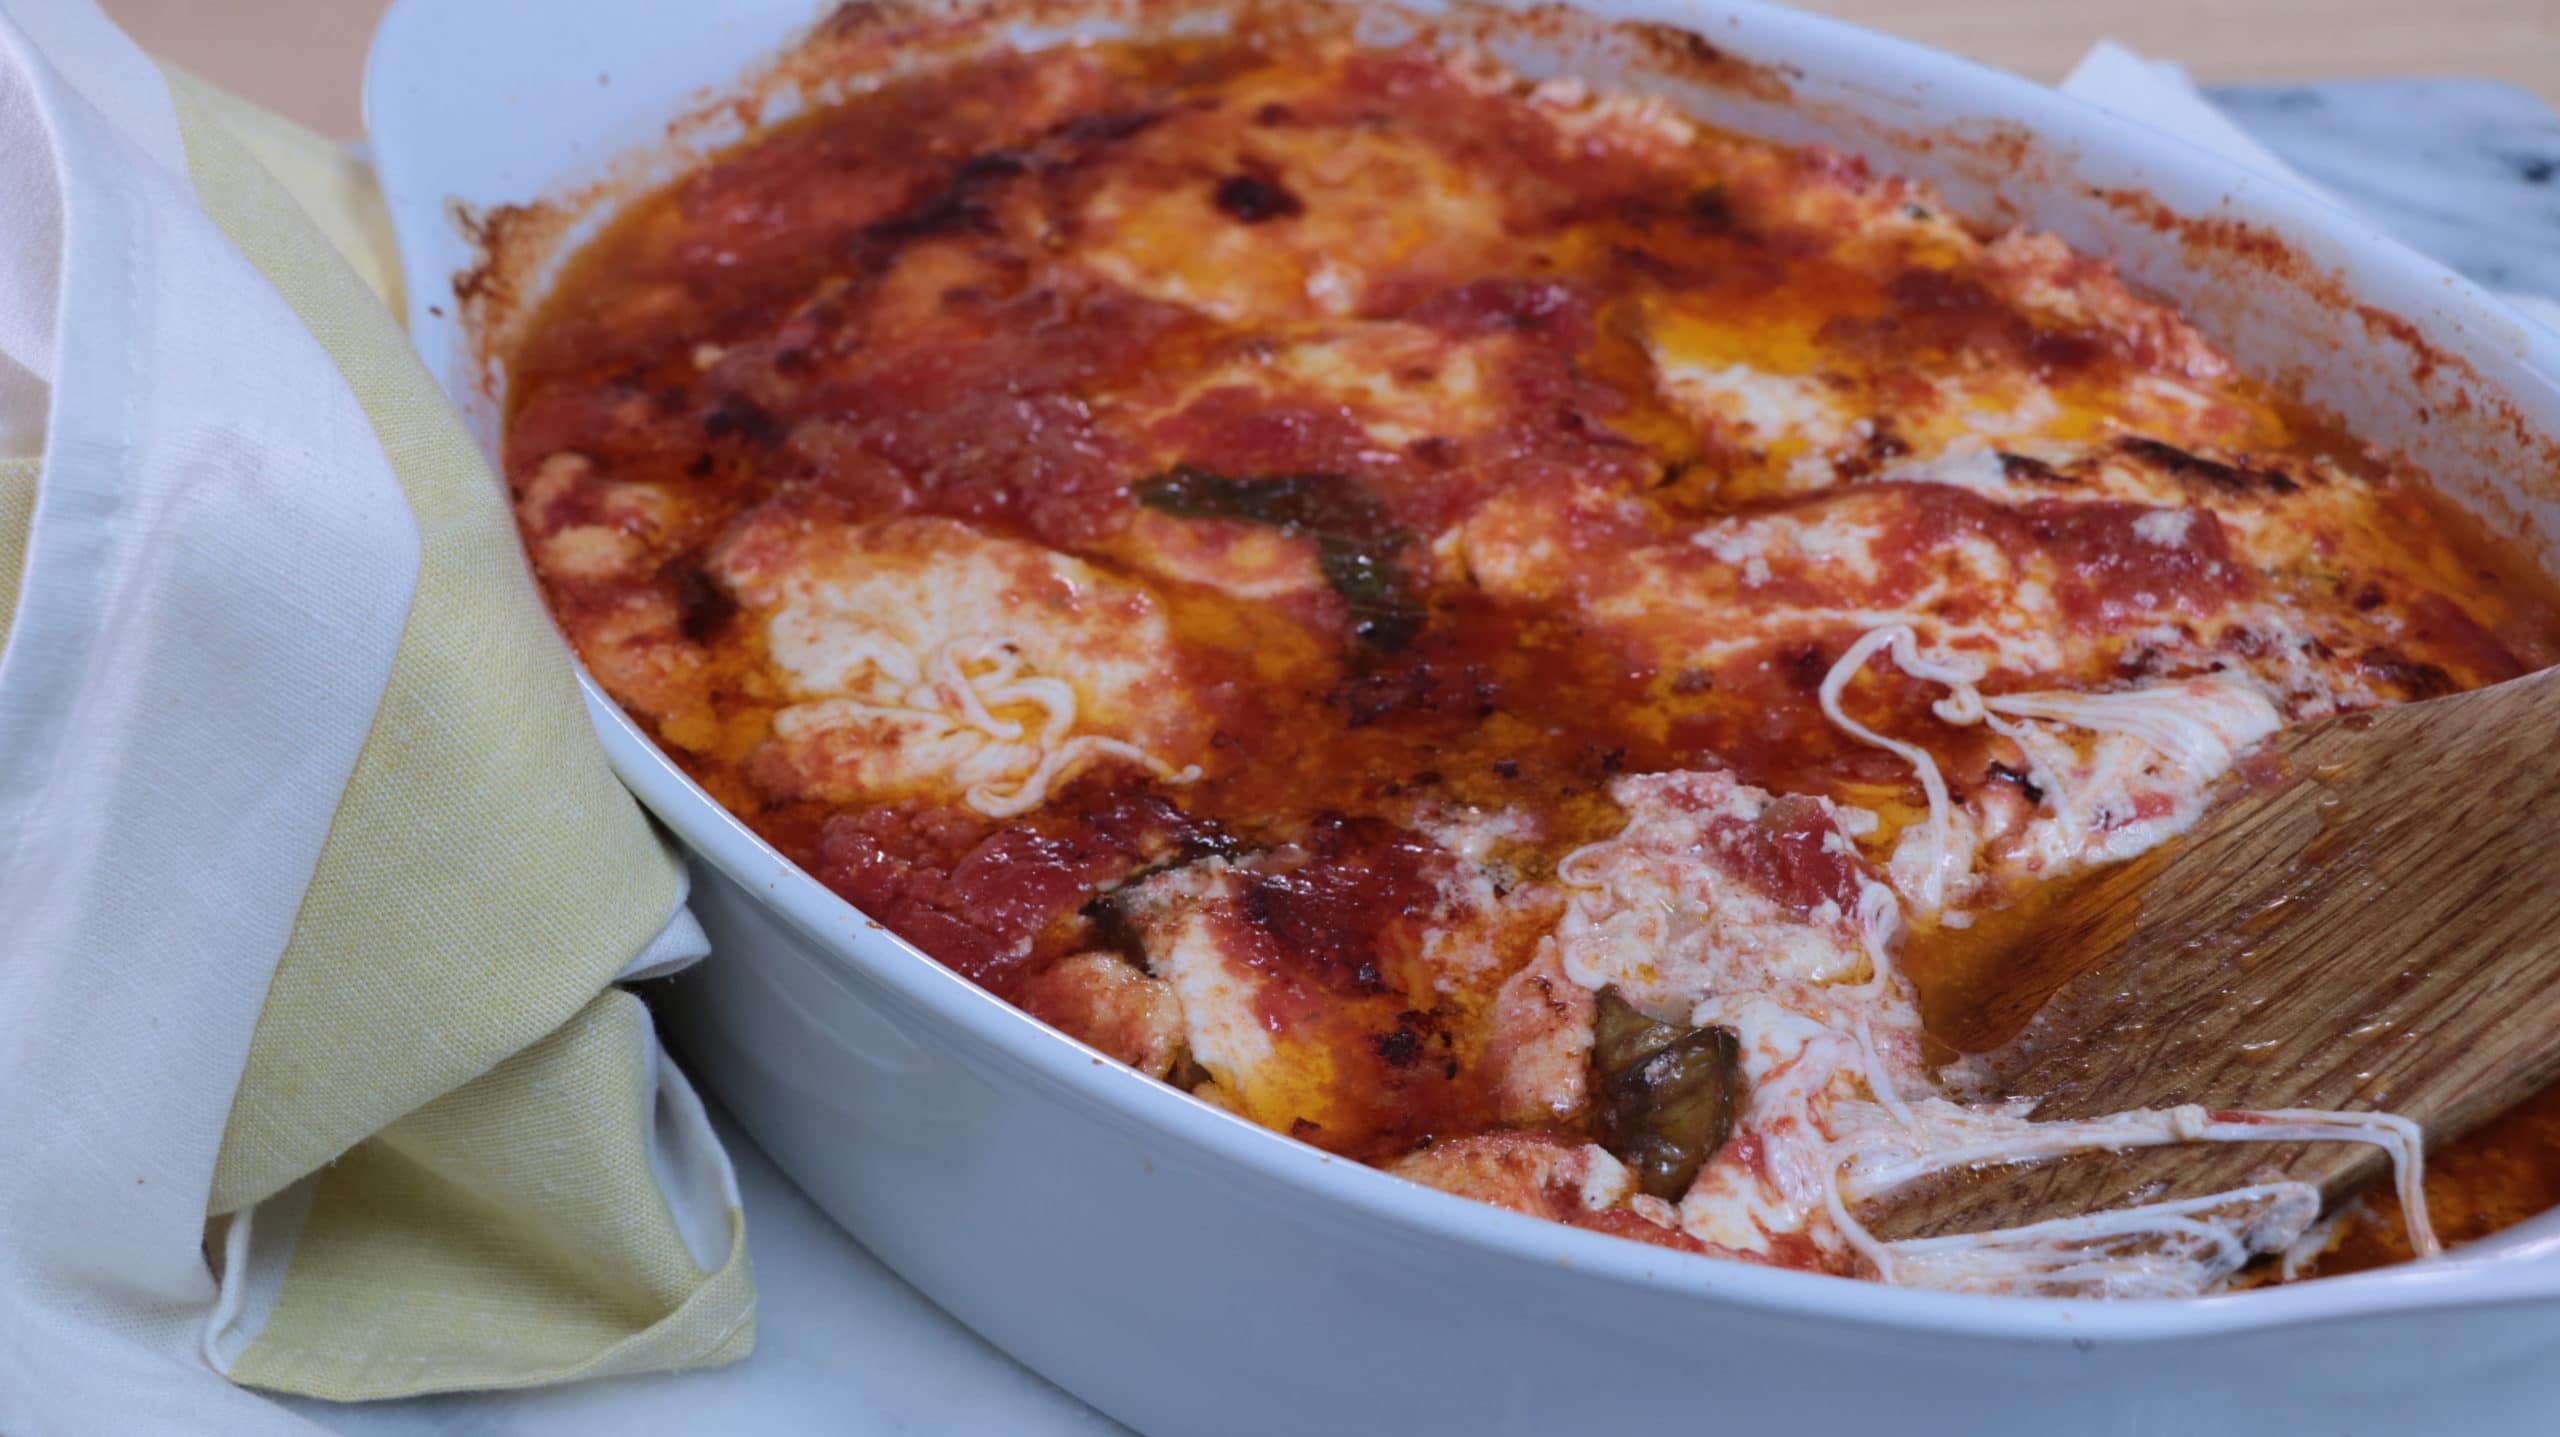 Low-carb meatless eggplant lasagna in a large white casserole